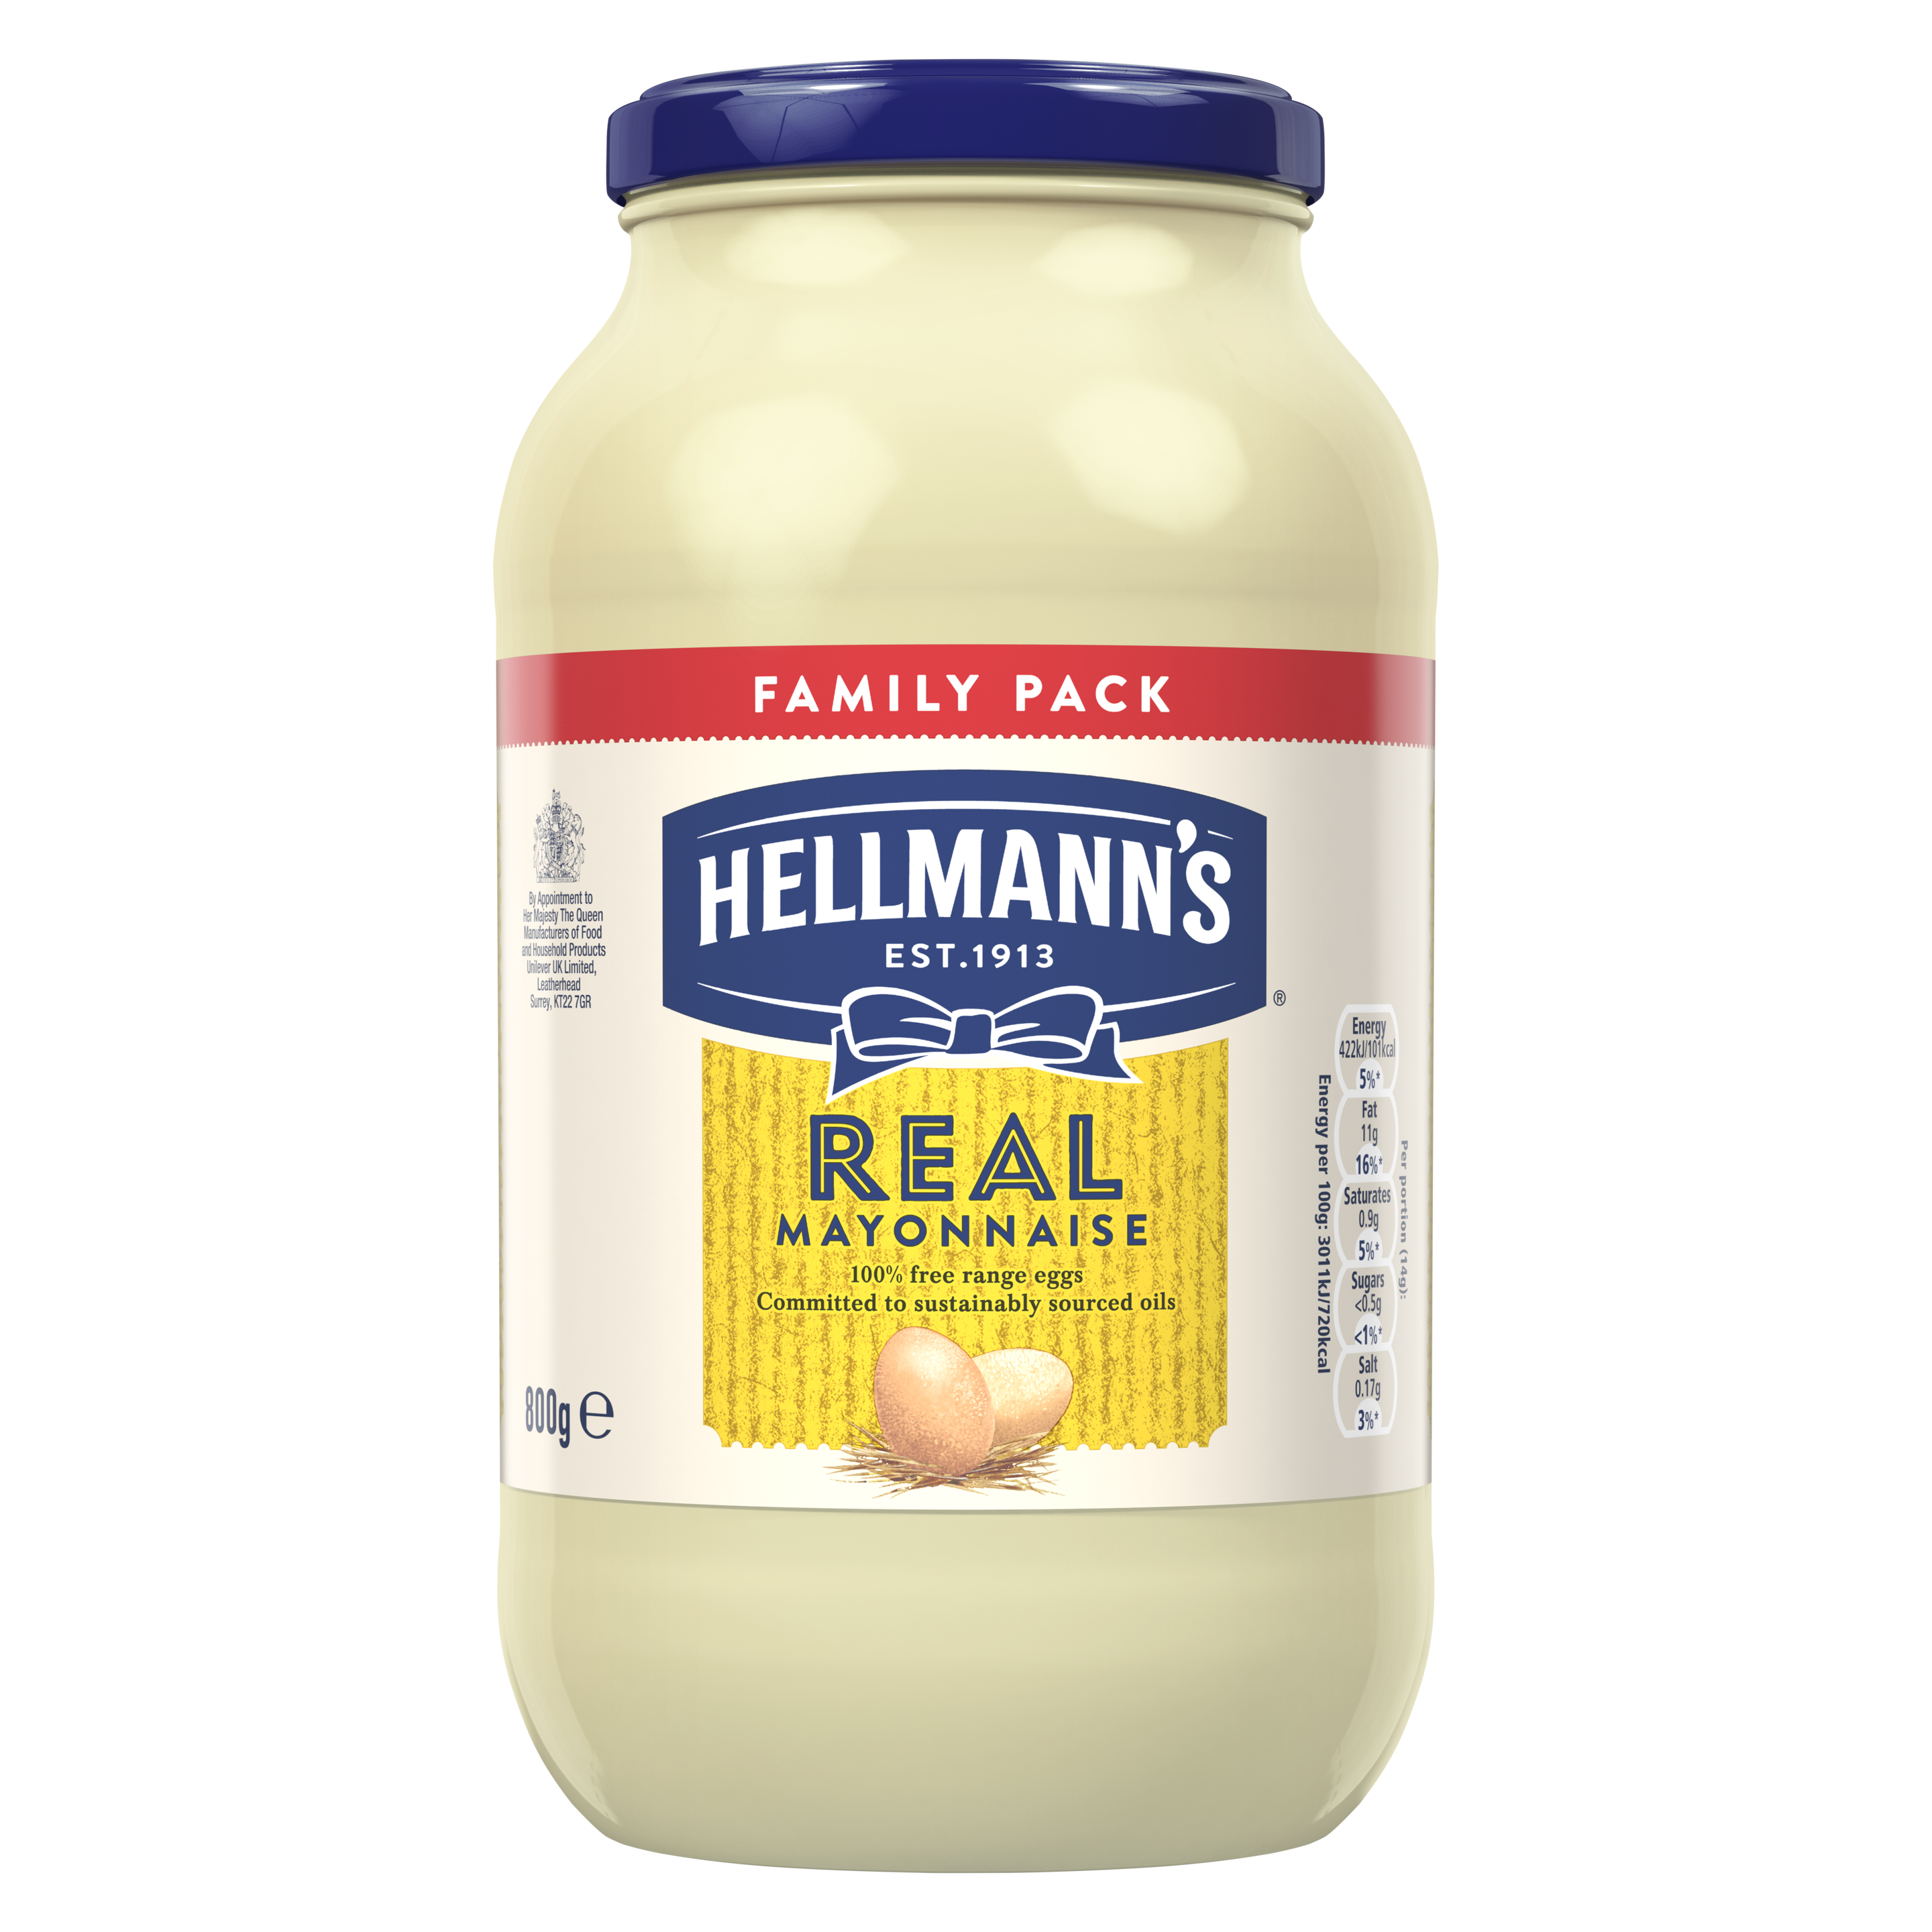 Hellmann's BBQ Sauce 250ml ❤️ home delivery from the store